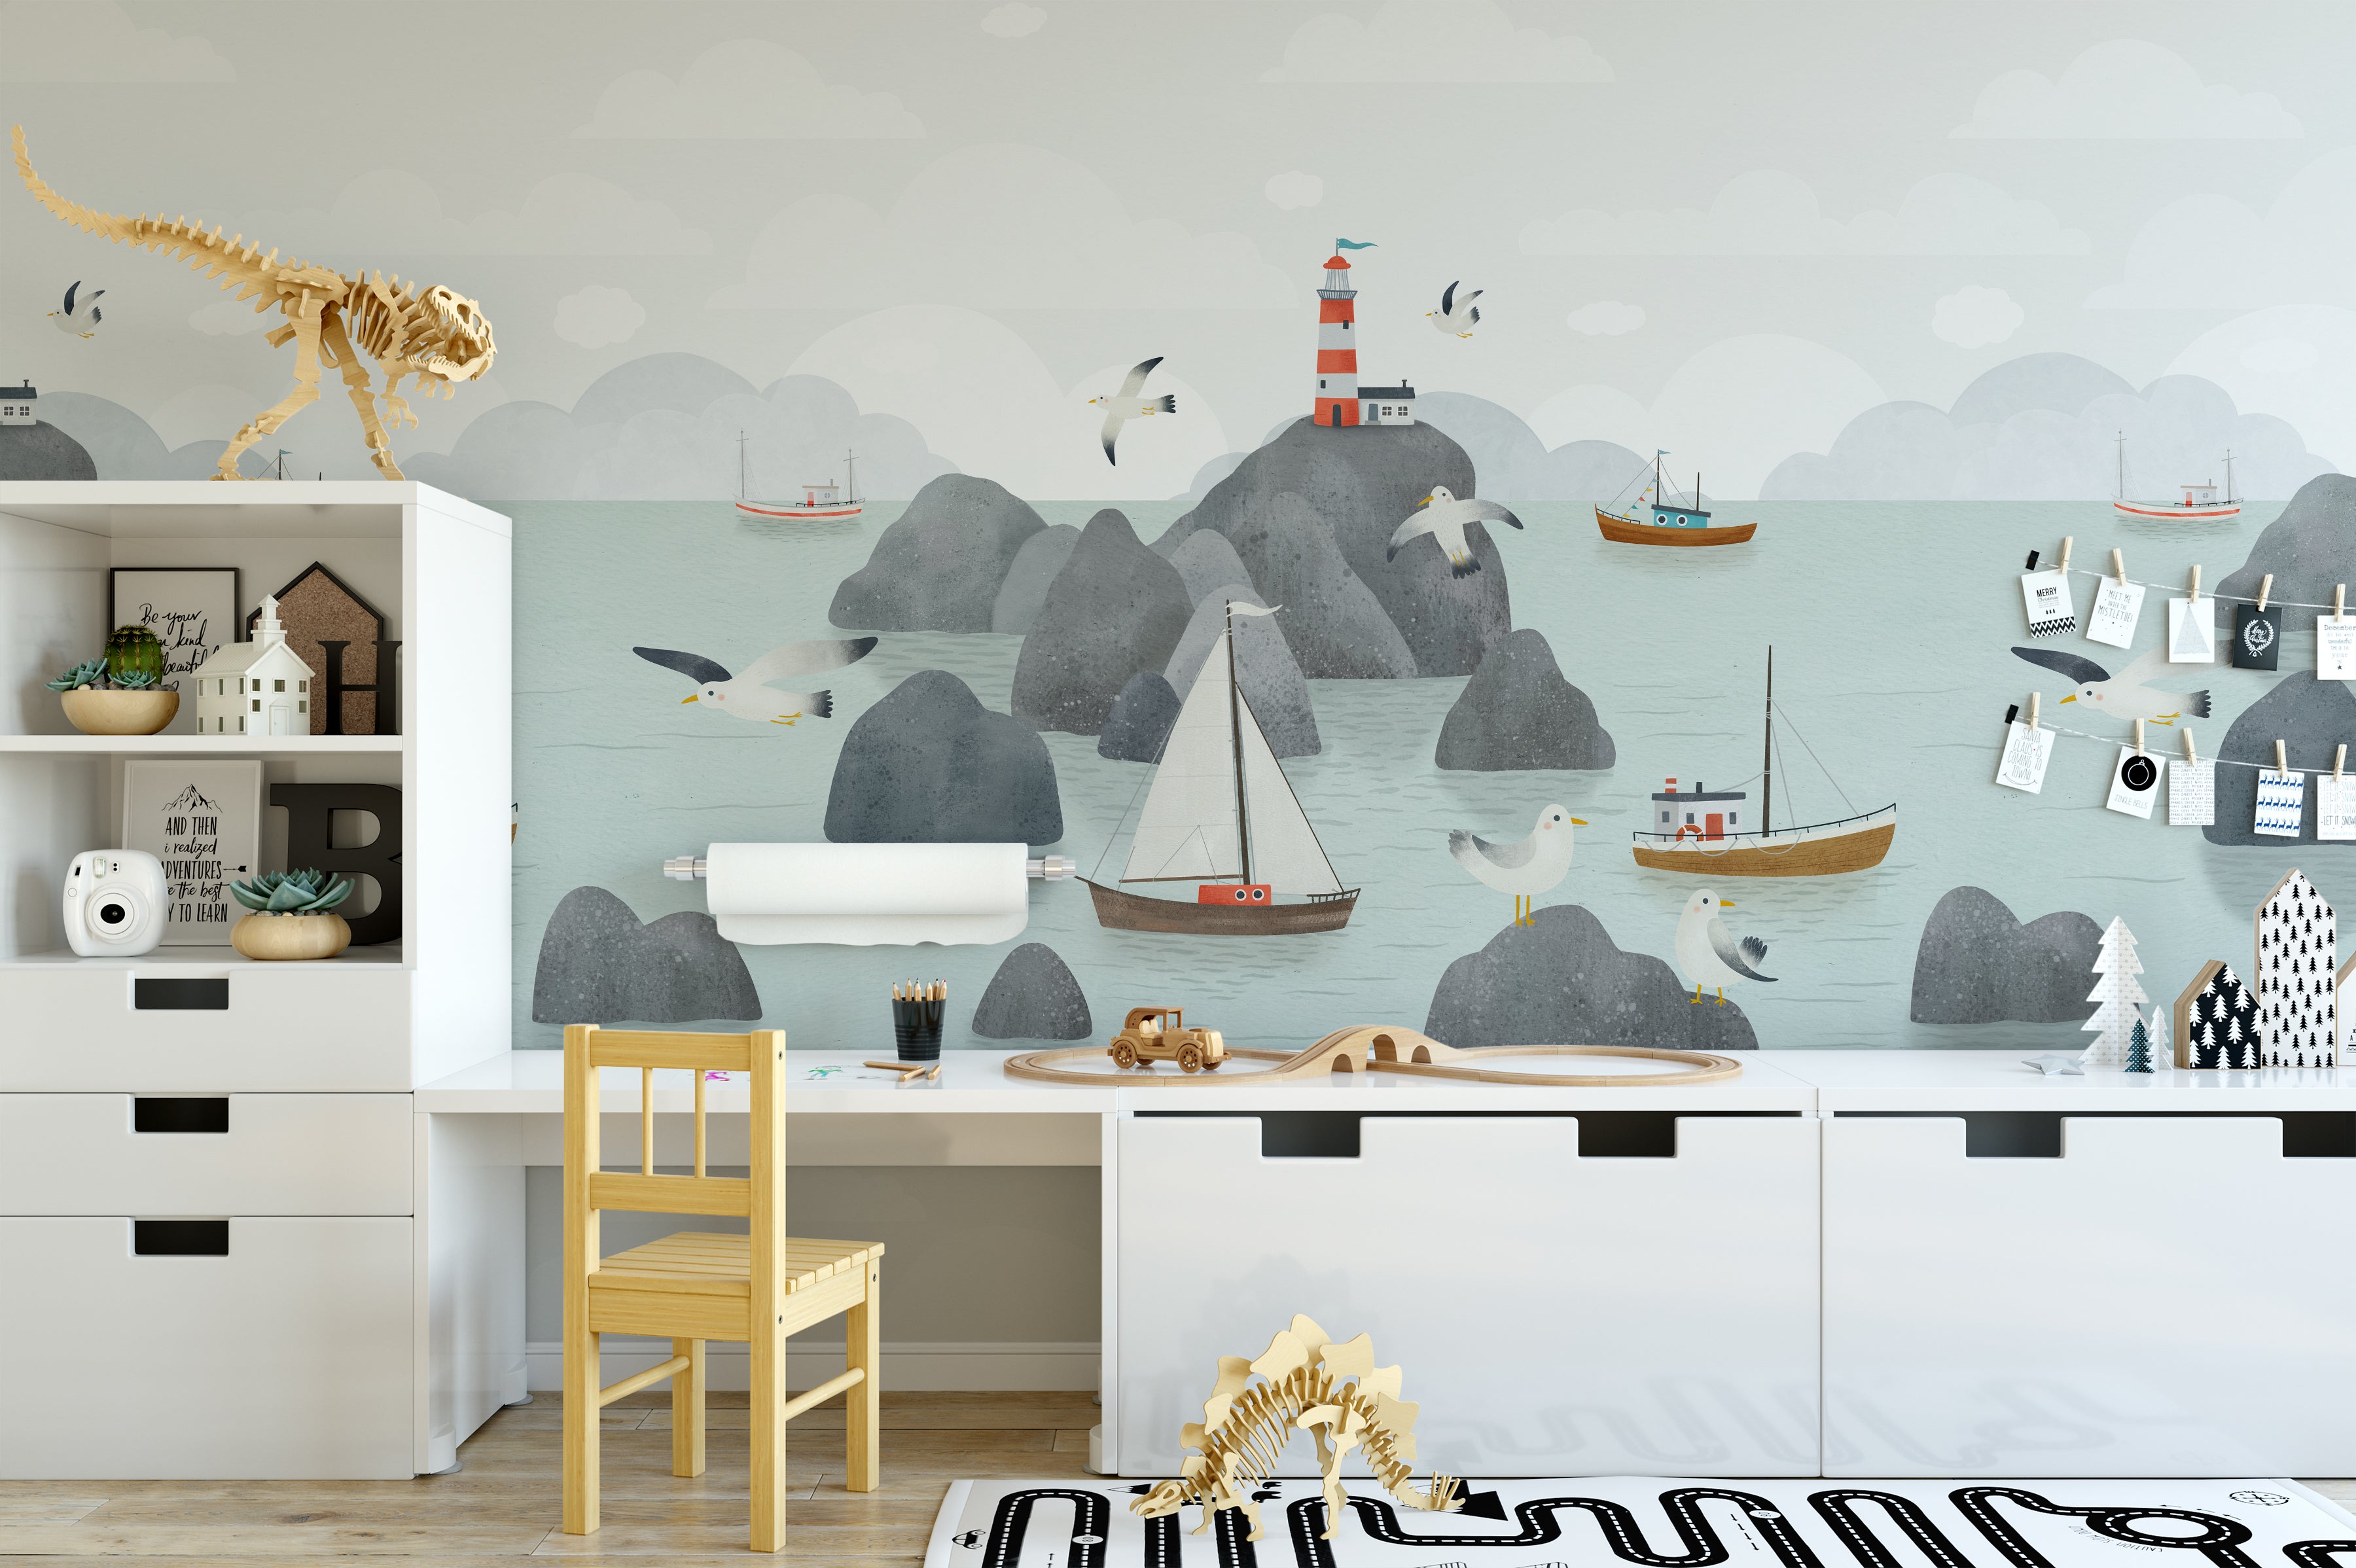 a detailed look at the wallpaper's design, highlighting the gentle watercolor style of the sailboats, the quaint lighthouse, and the playful seagulls. The illustration is set against a peaceful background of rounded mountains and a soft sky, creating a sense of calm and imagination for a child's room.